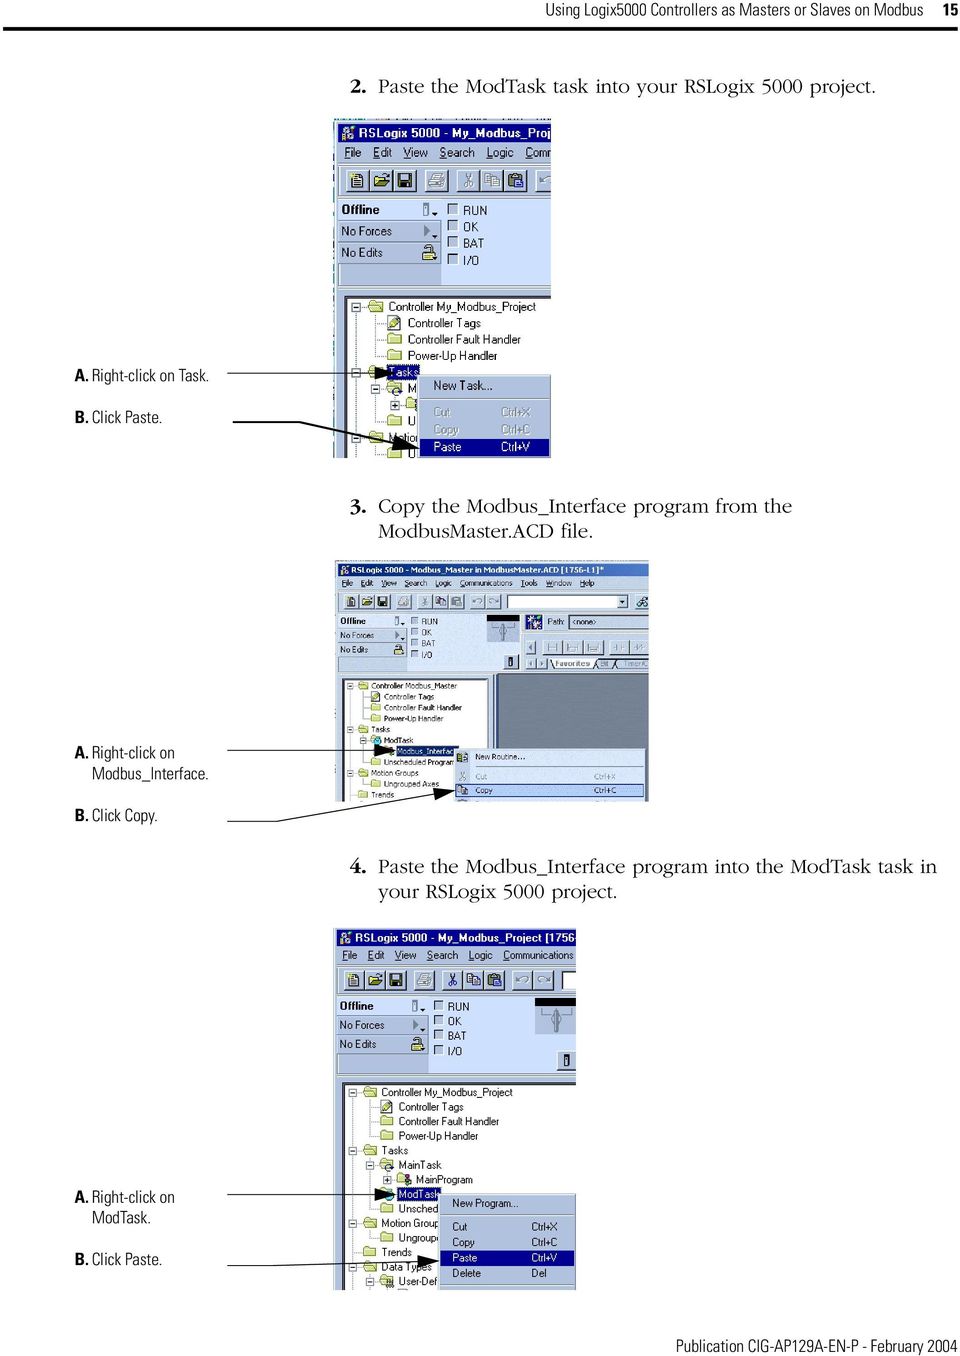 Copy the Modbus_Interface program from the ModbusMaster.ACD file. A. Right-click on Modbus_Interface.